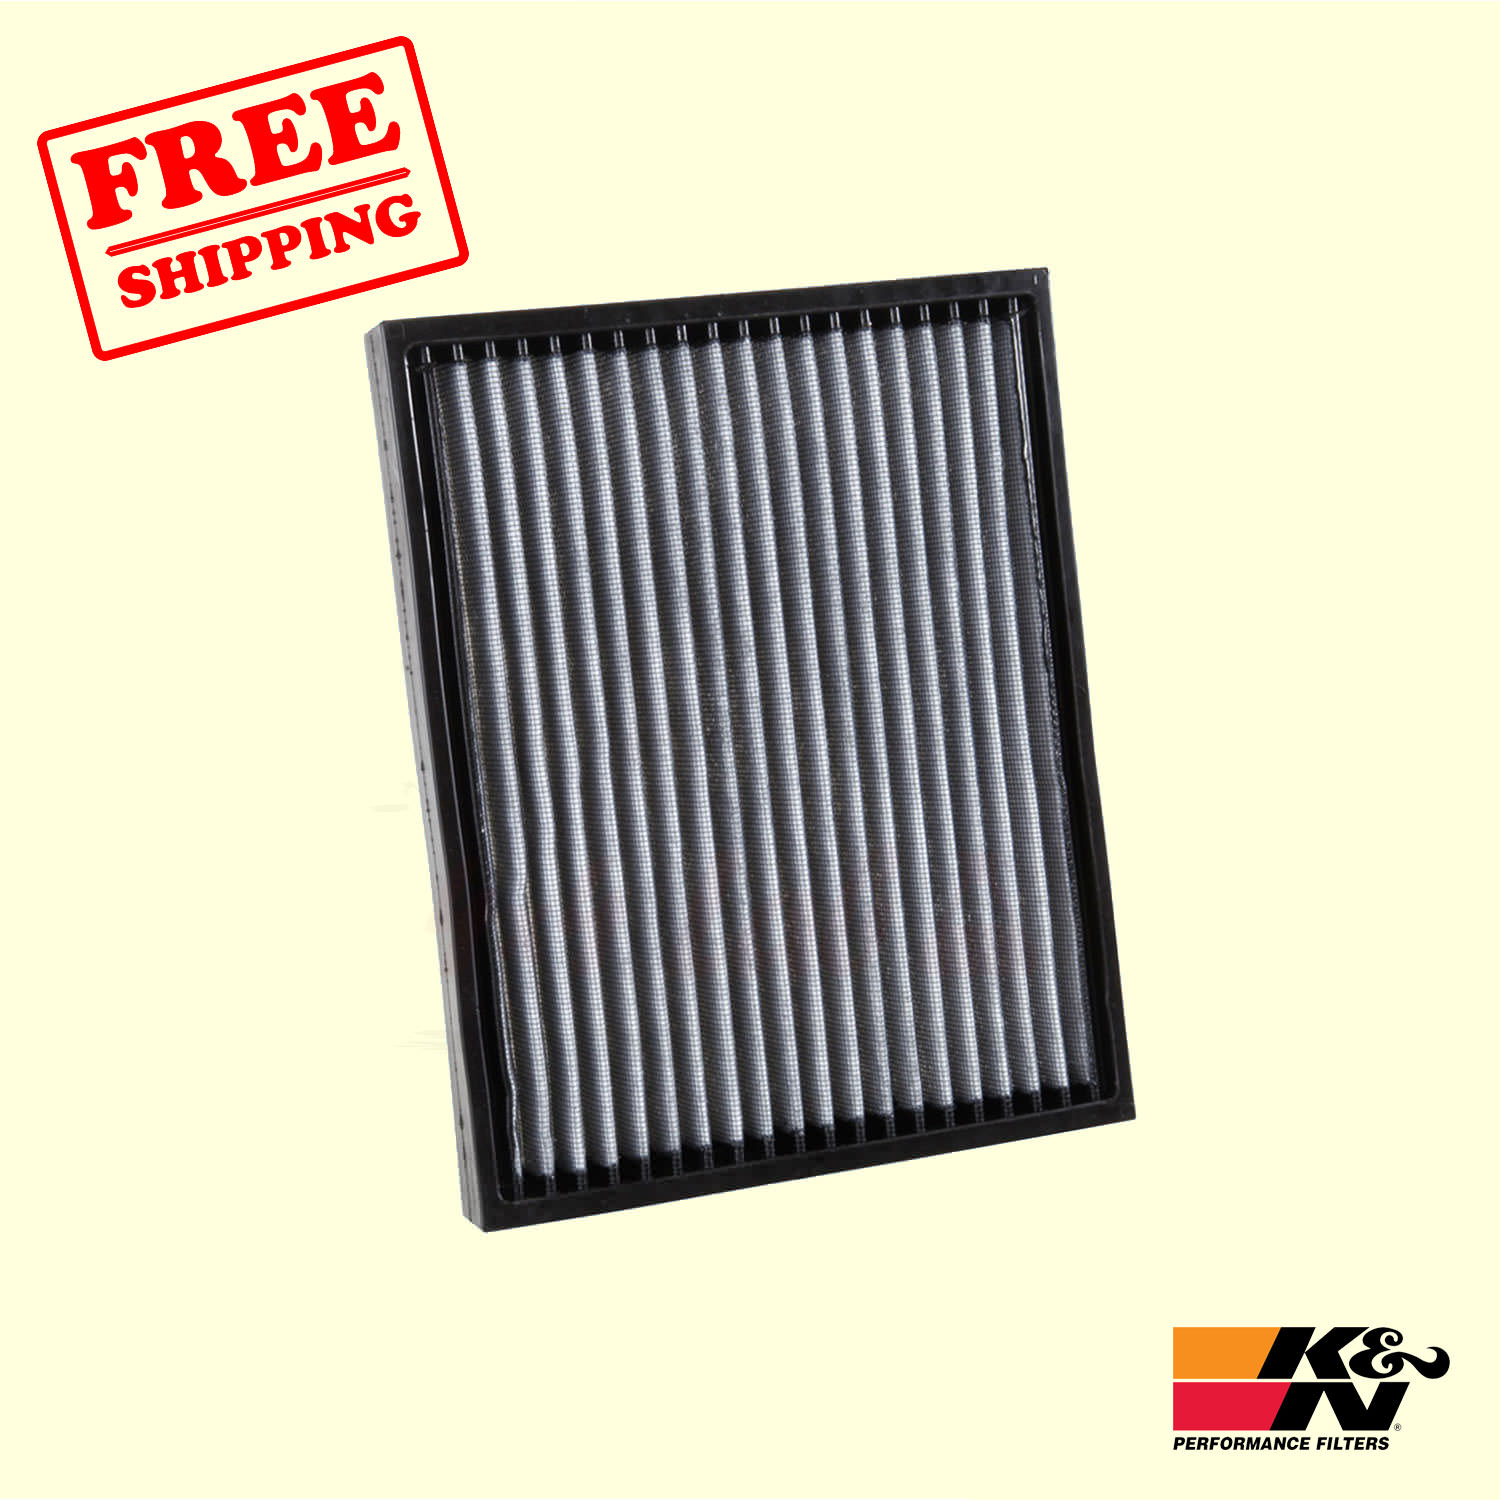 Cabin Air Filter for Ford F-450 Super Duty 2017-2019 K&N | eBay 2019 Ford Super Duty Cabin Air Filter